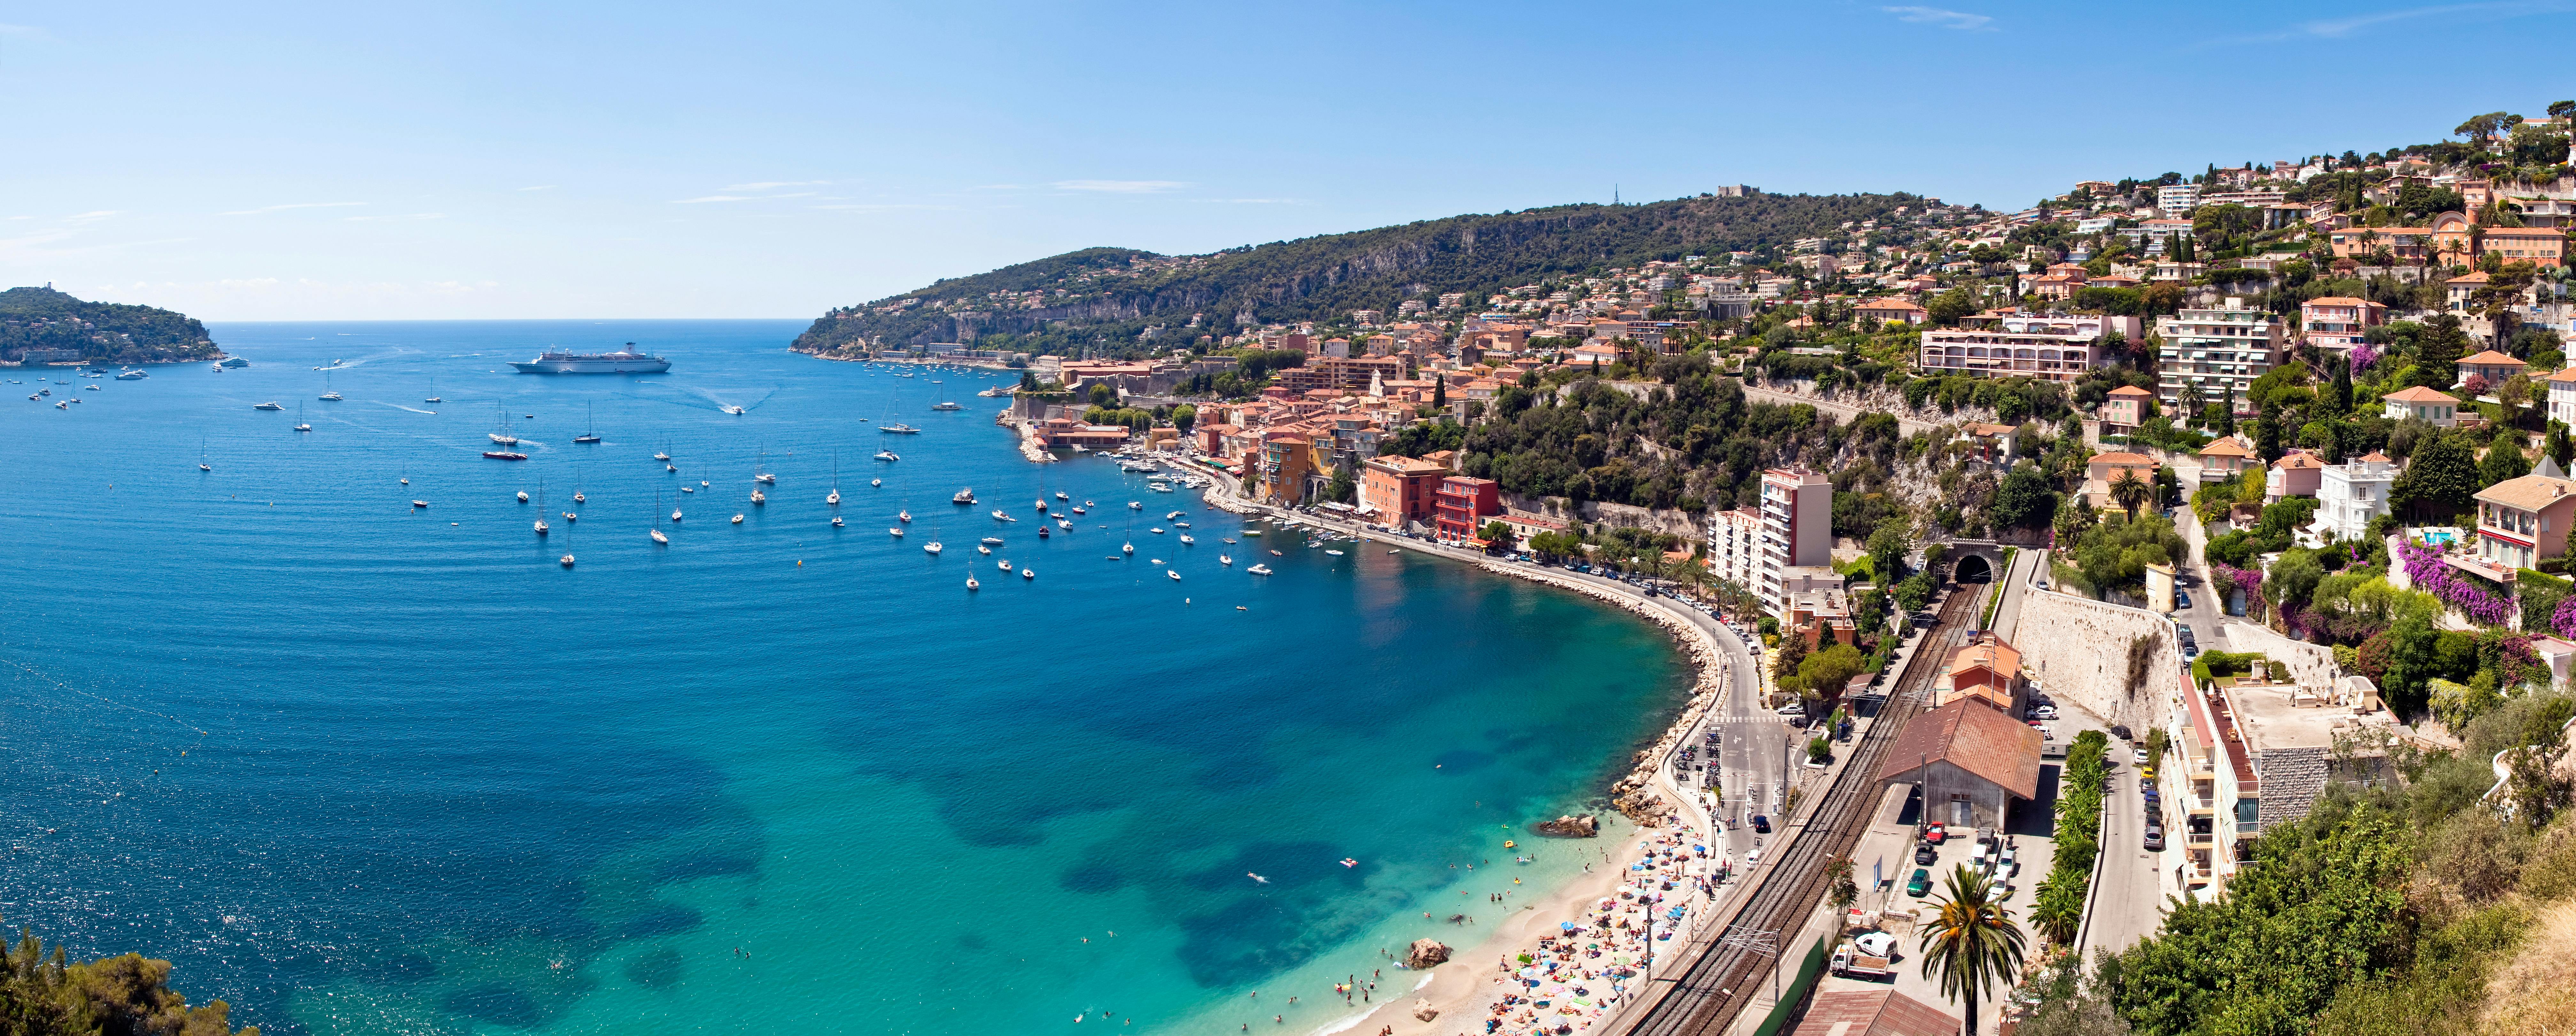 Private Cannes and Antibes trip from Nice or Villefranche ports